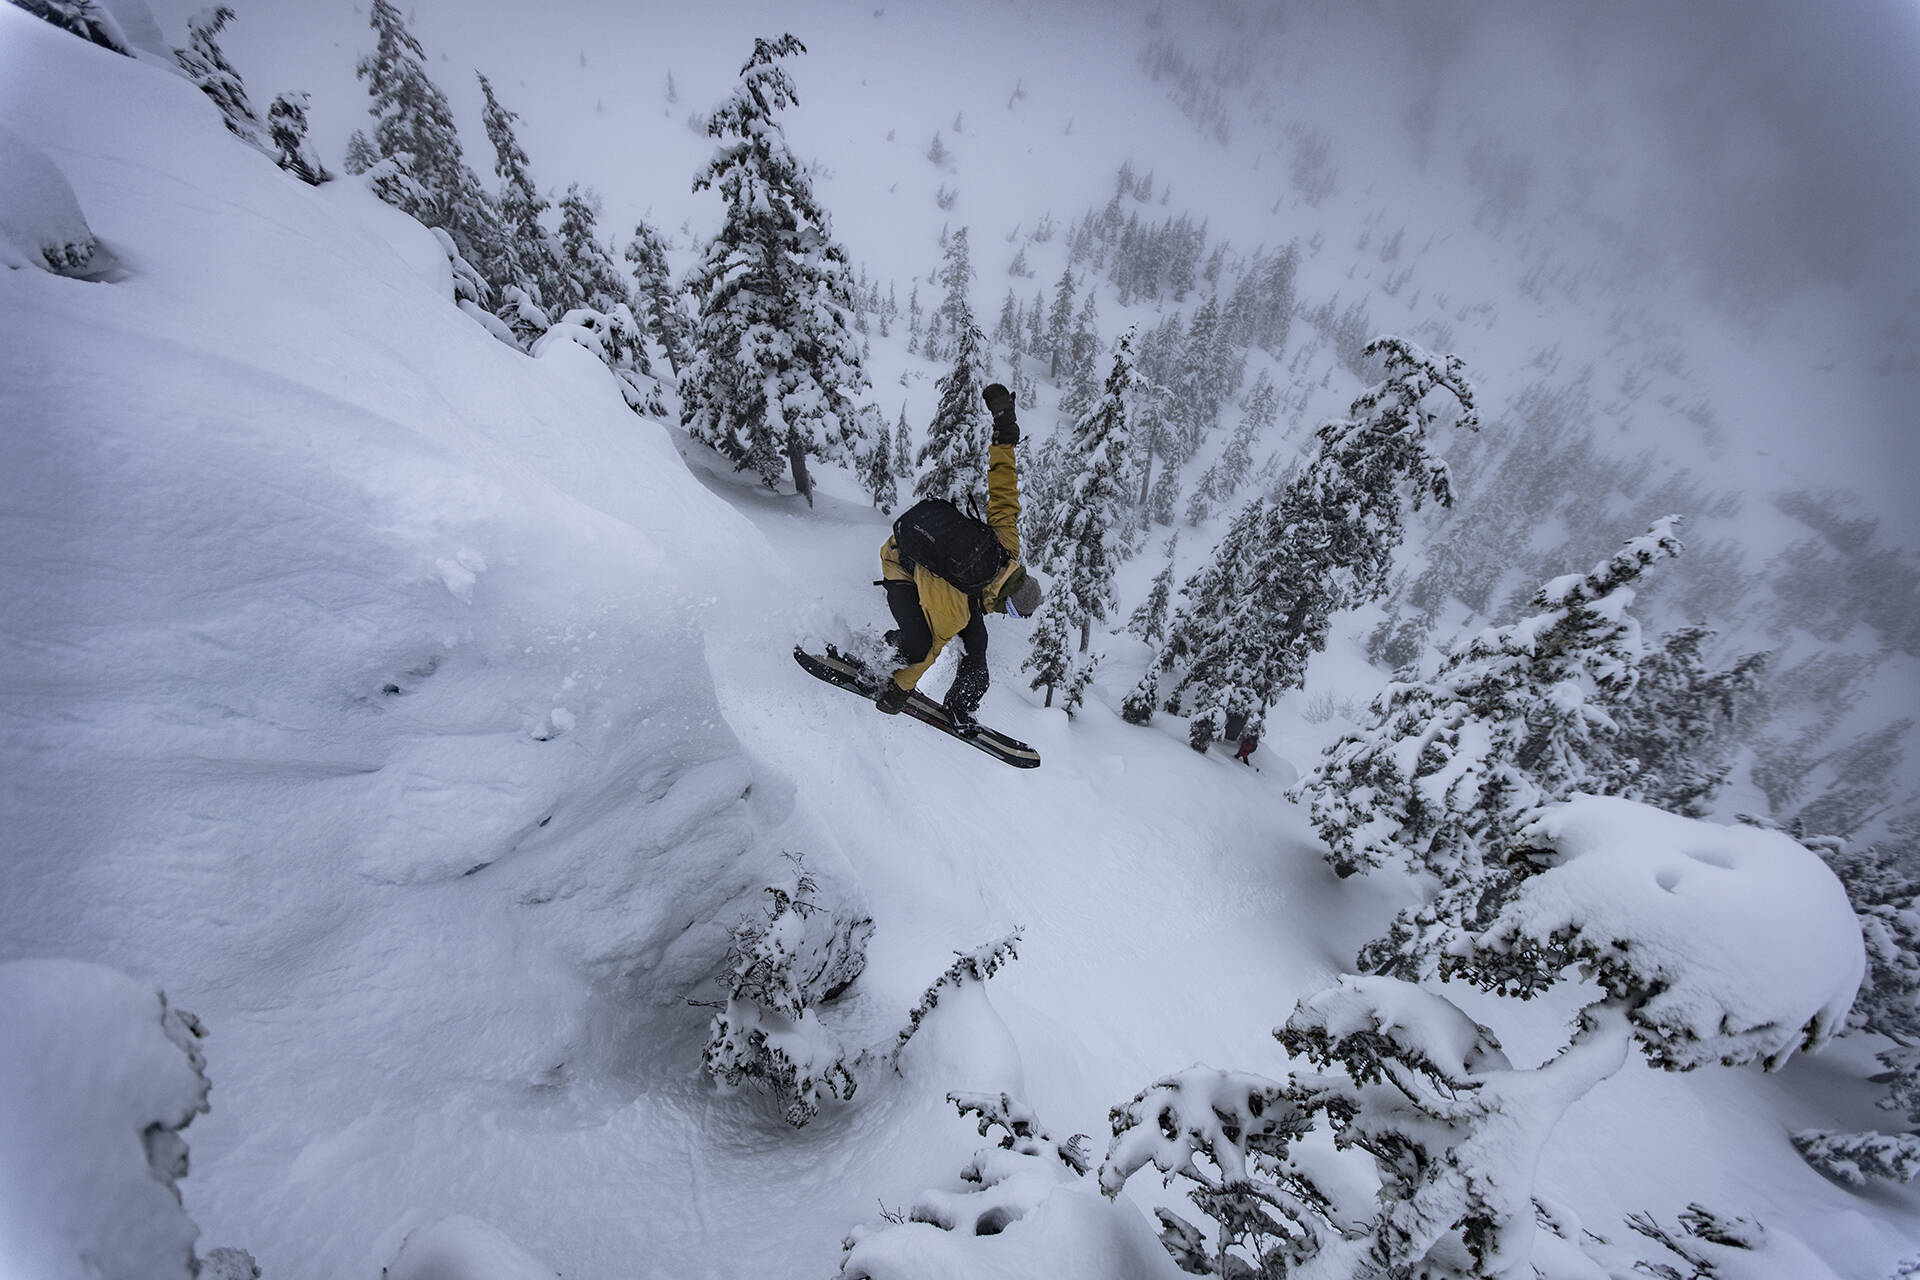 Mark Rainery riding backcountry trails of Southeast as part of his latest collaborative snowboarding film, “The Outliers,” which premiered on Feb. 11 at the Hangar Ballroom in Juneau. (Courtesy Photo / Scott Baxter)